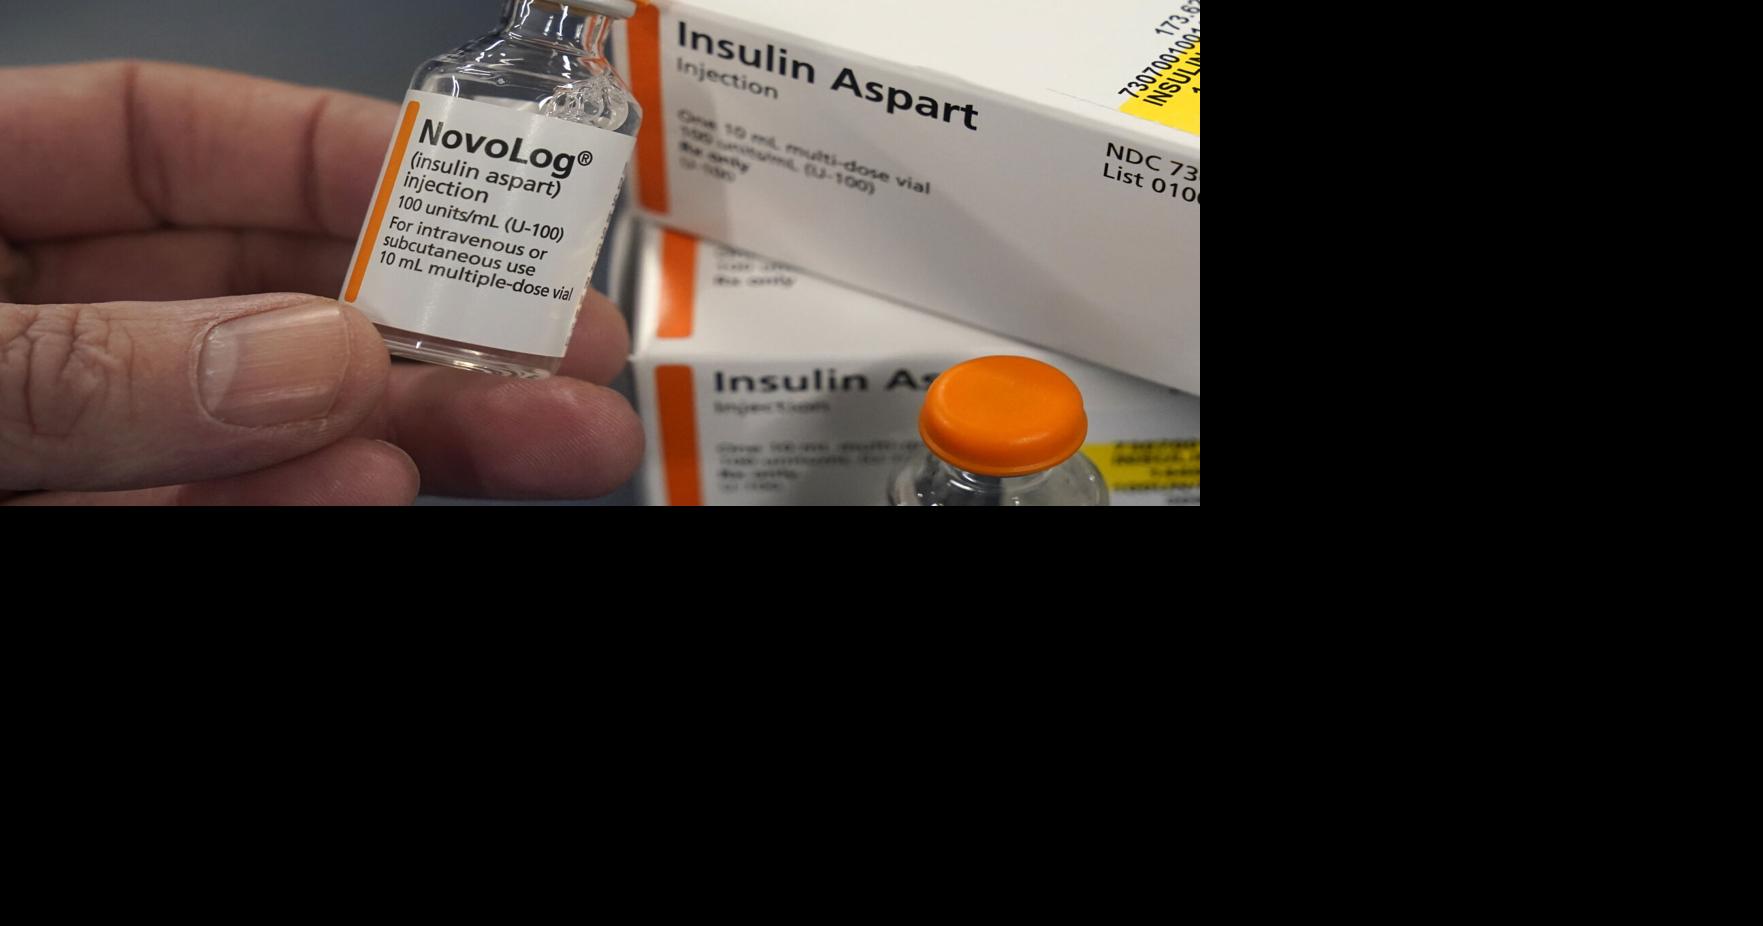 Idaho view: Use insulin? Idaho’s senators just hung you out to dry. Thank them for your next bill